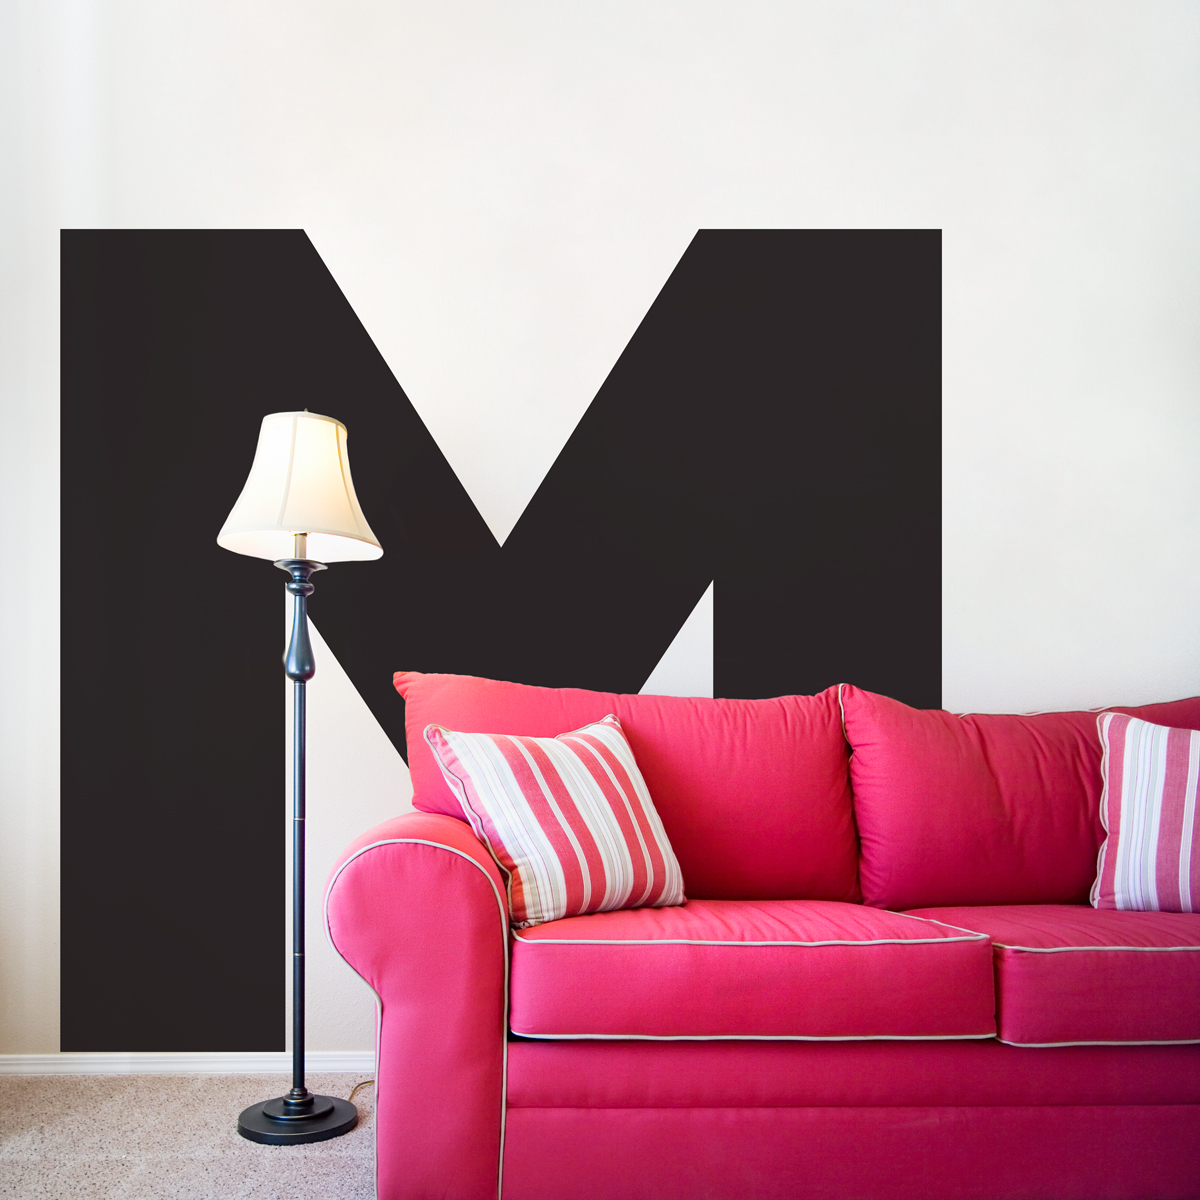 Large Letter Wall Decals, Vinyl Wall Letters